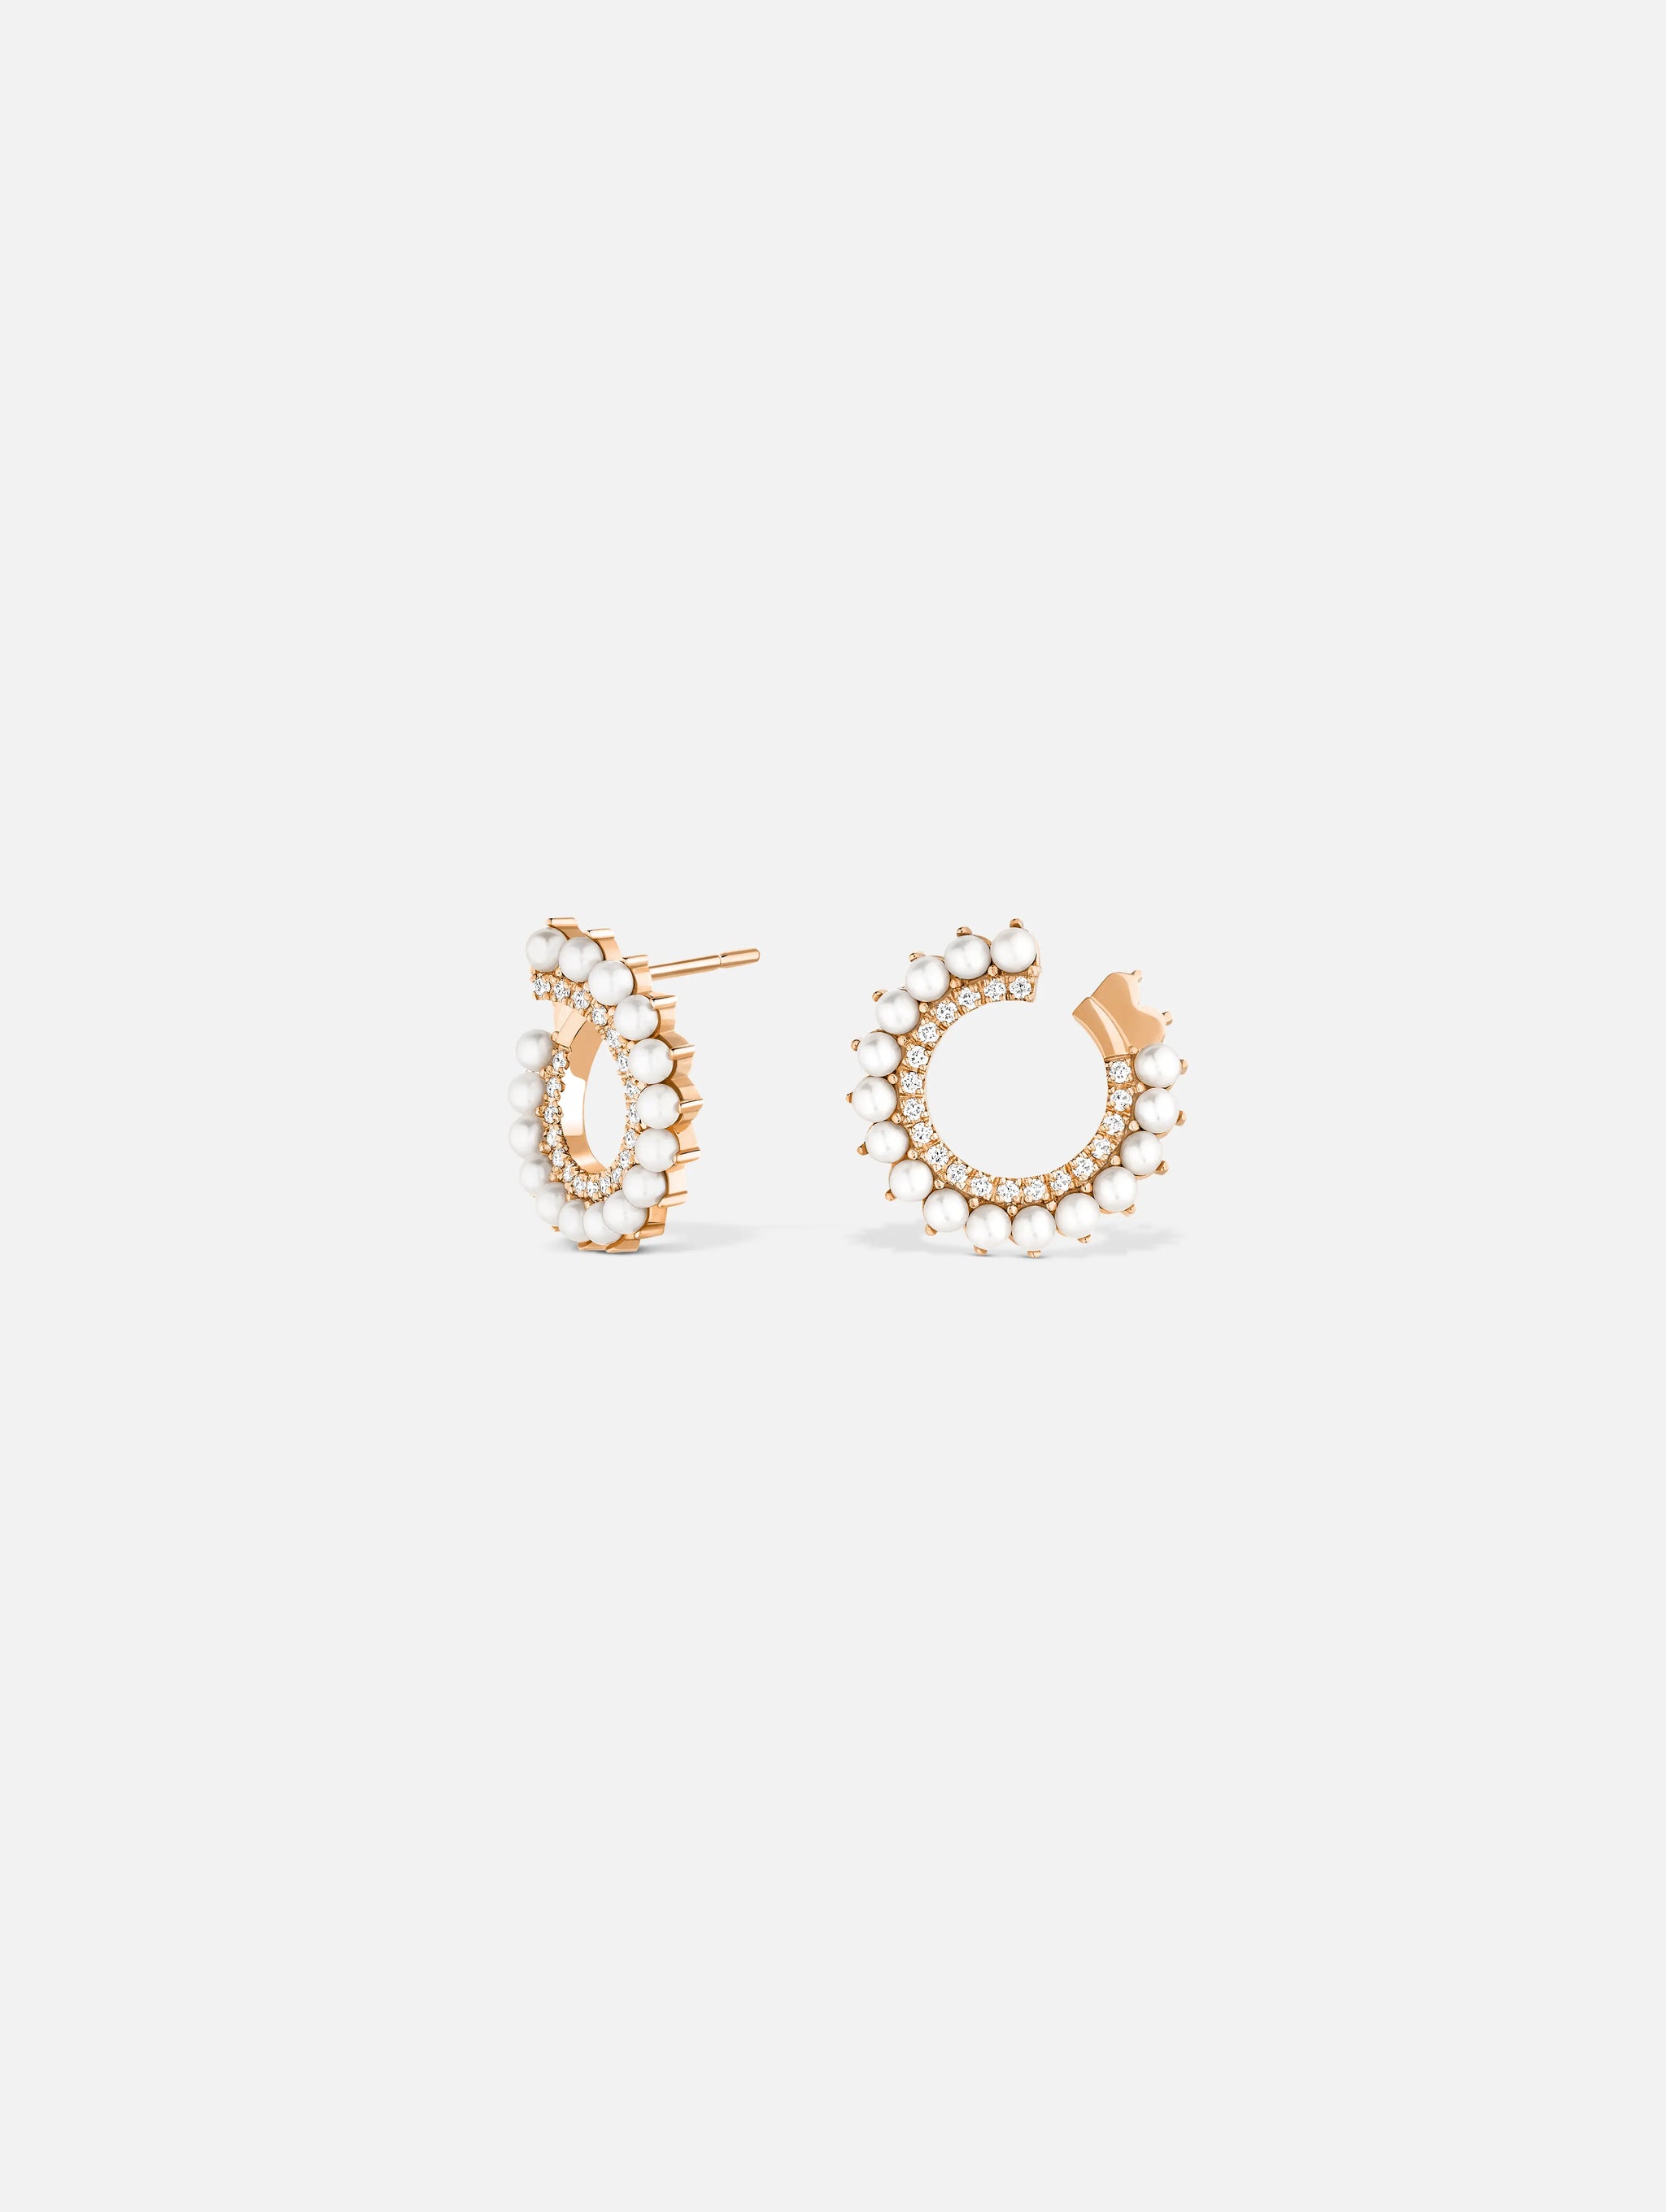 Pearl Earrings in Rose Gold - 1 - Nouvel Heritage